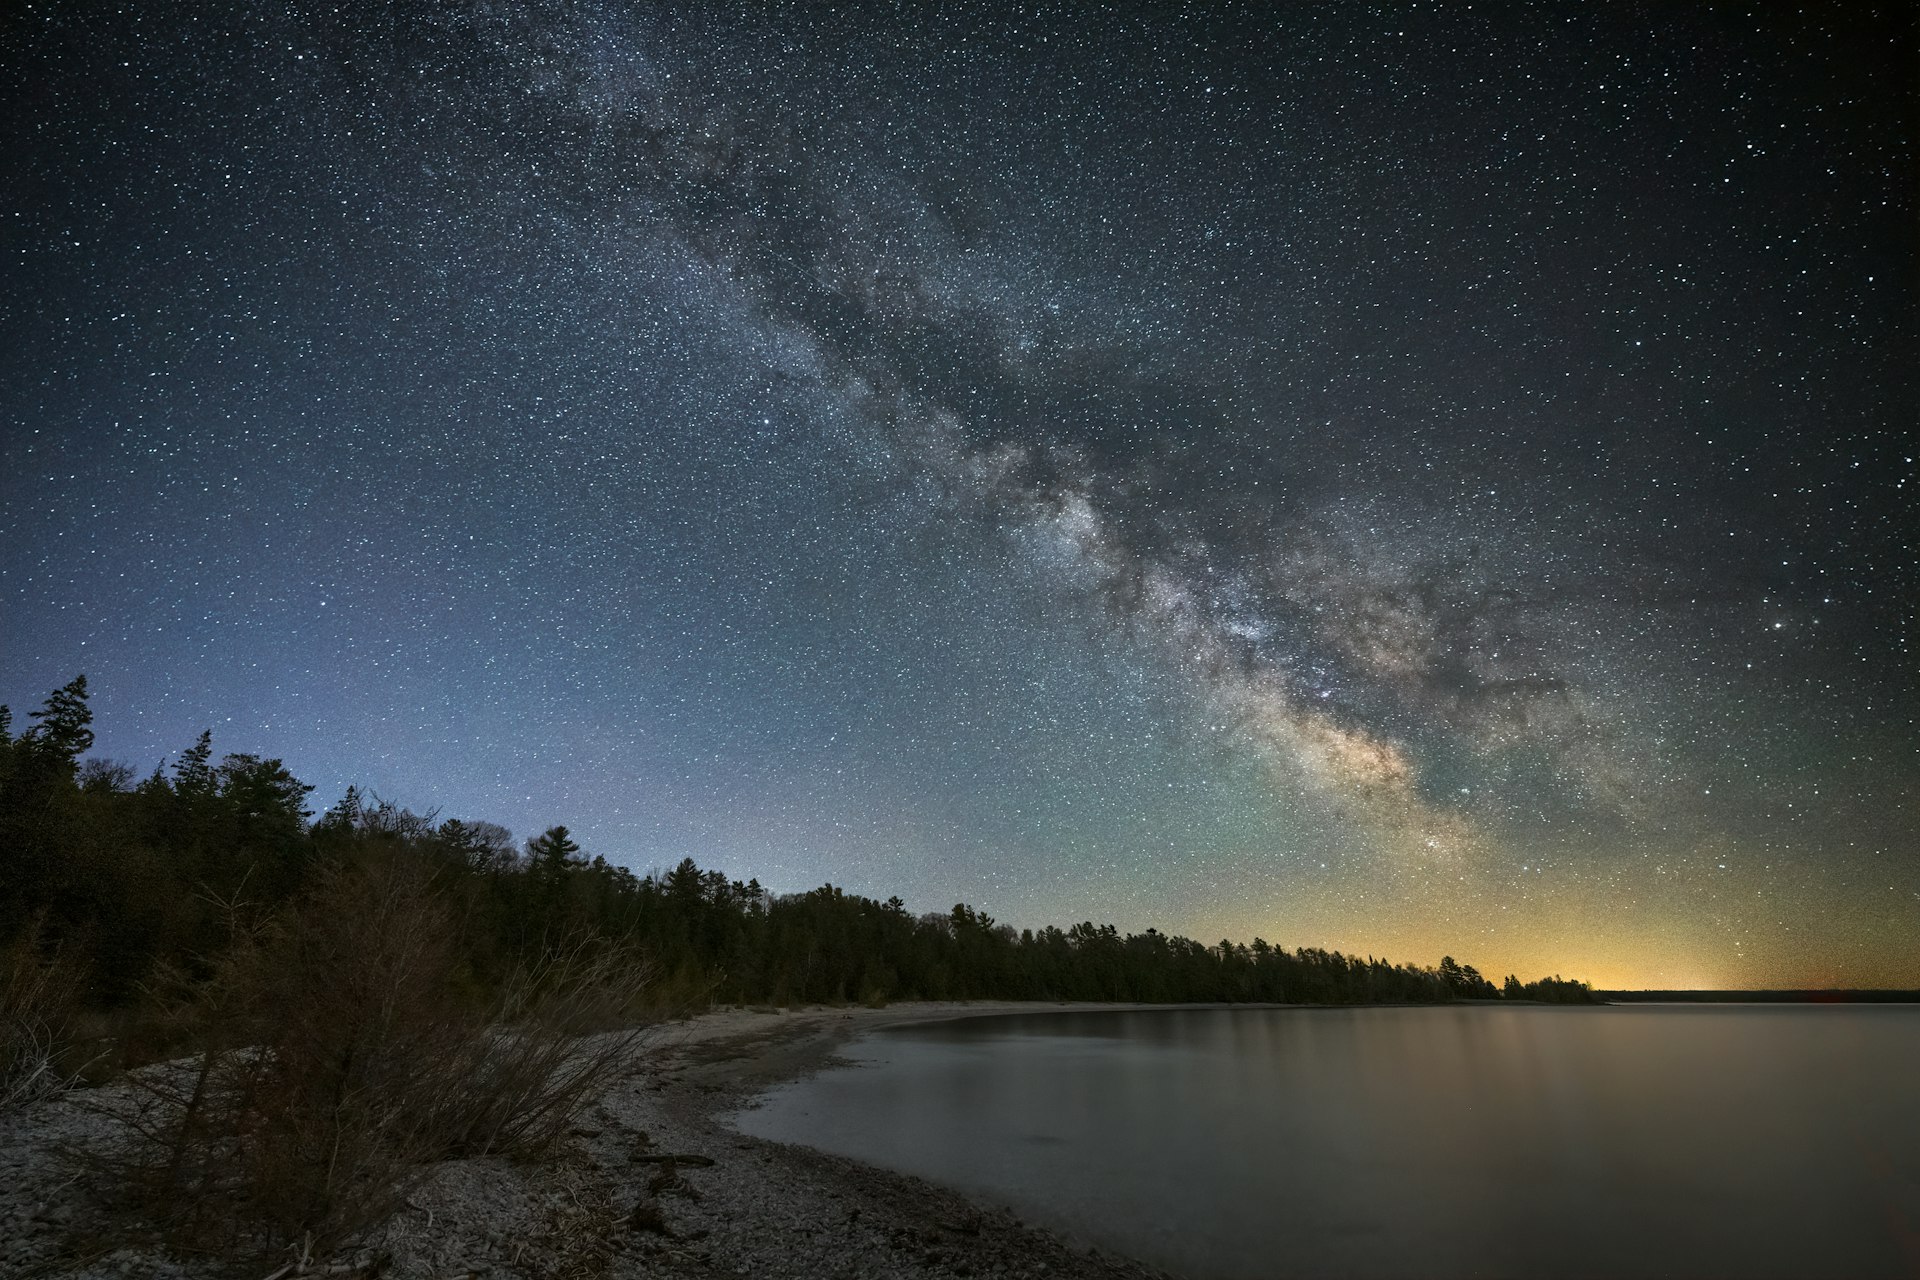 The night sky lit up by millions of stars above a body of water at Headlands International Dark Sky Park, Michigan